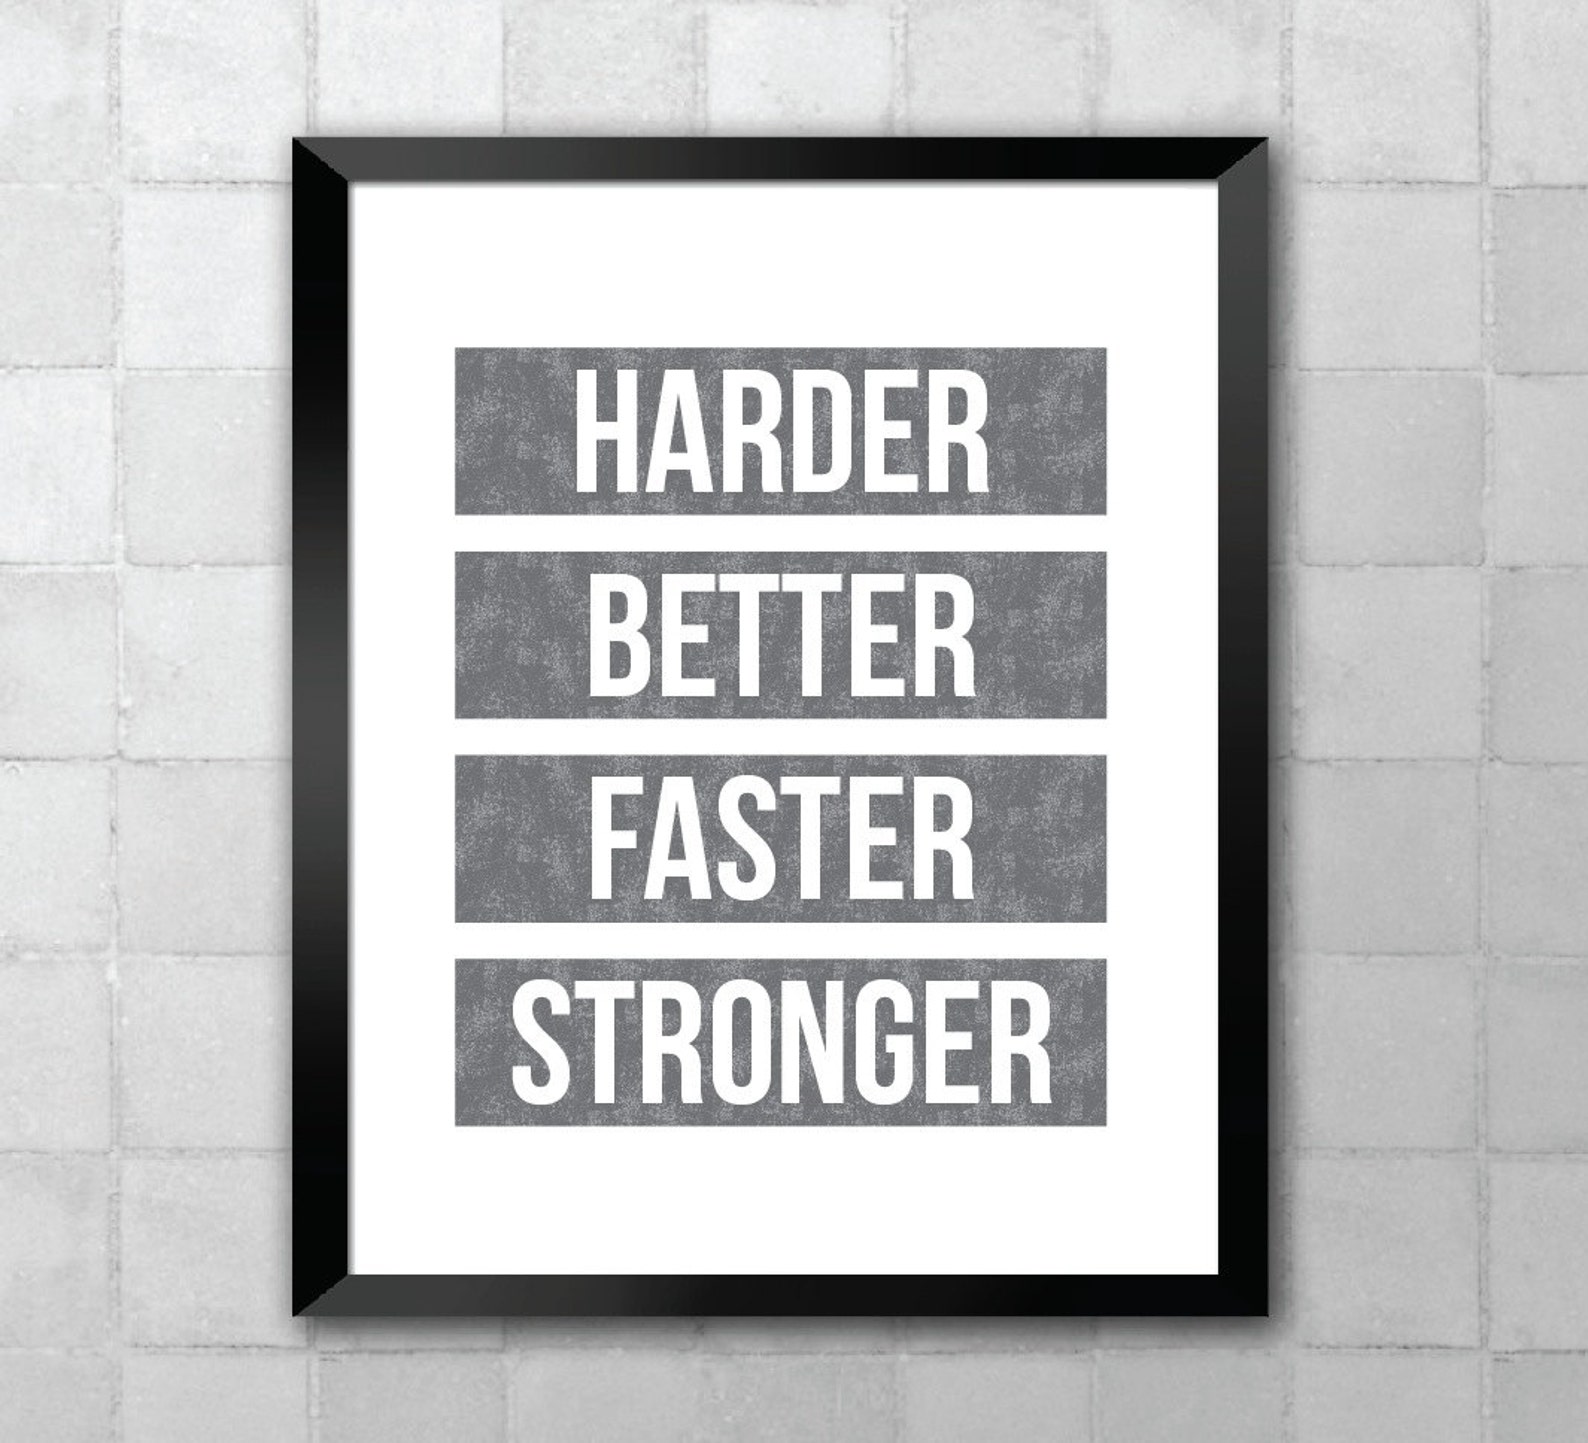 Включи faster and harder. Harder better faster stronger. Песня harder better faster stronger. Harder better faster текст. Harder better faster stronger текст.